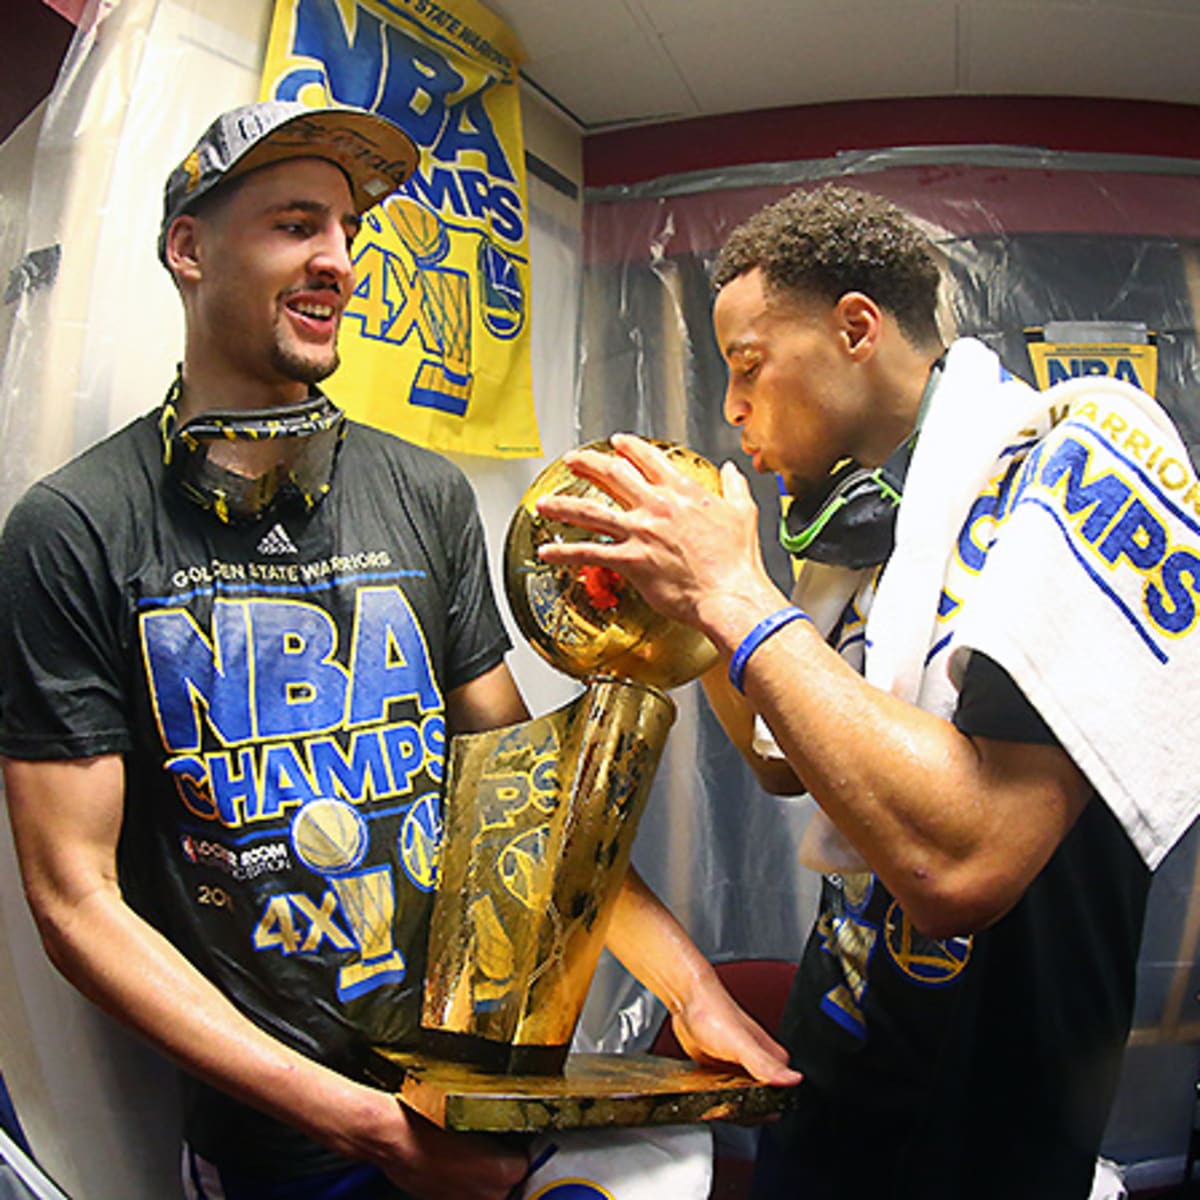 The true story of Steph Curry's championship season  at a Toronto middle  school